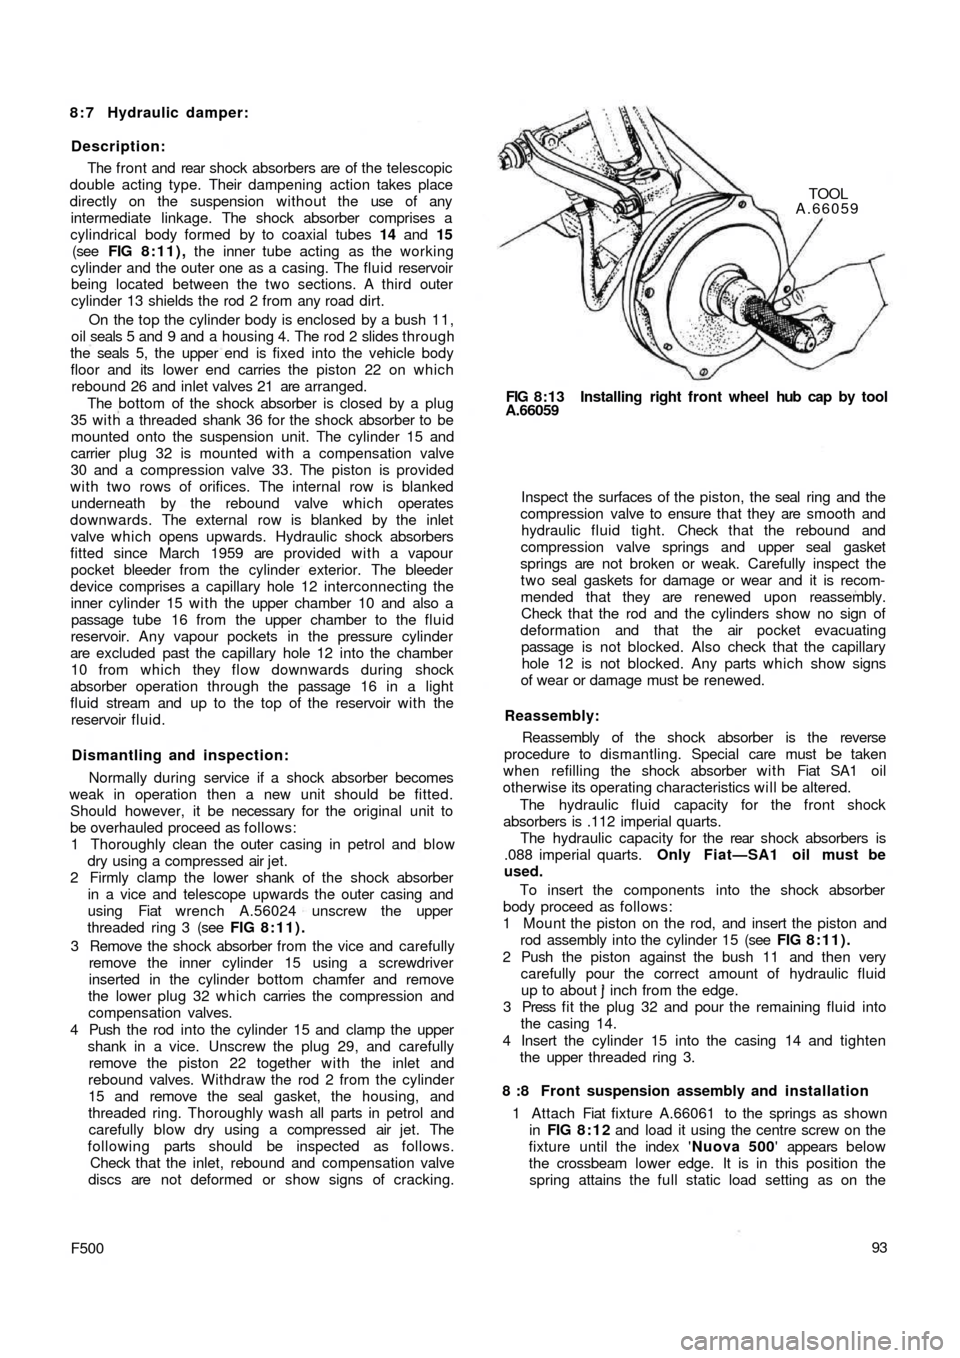 FIAT 500 1960 1.G Workshop Manual 8 : 7 Hydraulic damper:
Description:
The front and rear  shock absorbers are of the telescopic
double acting type. Their dampening action takes place
directly on the suspension without the use of any
